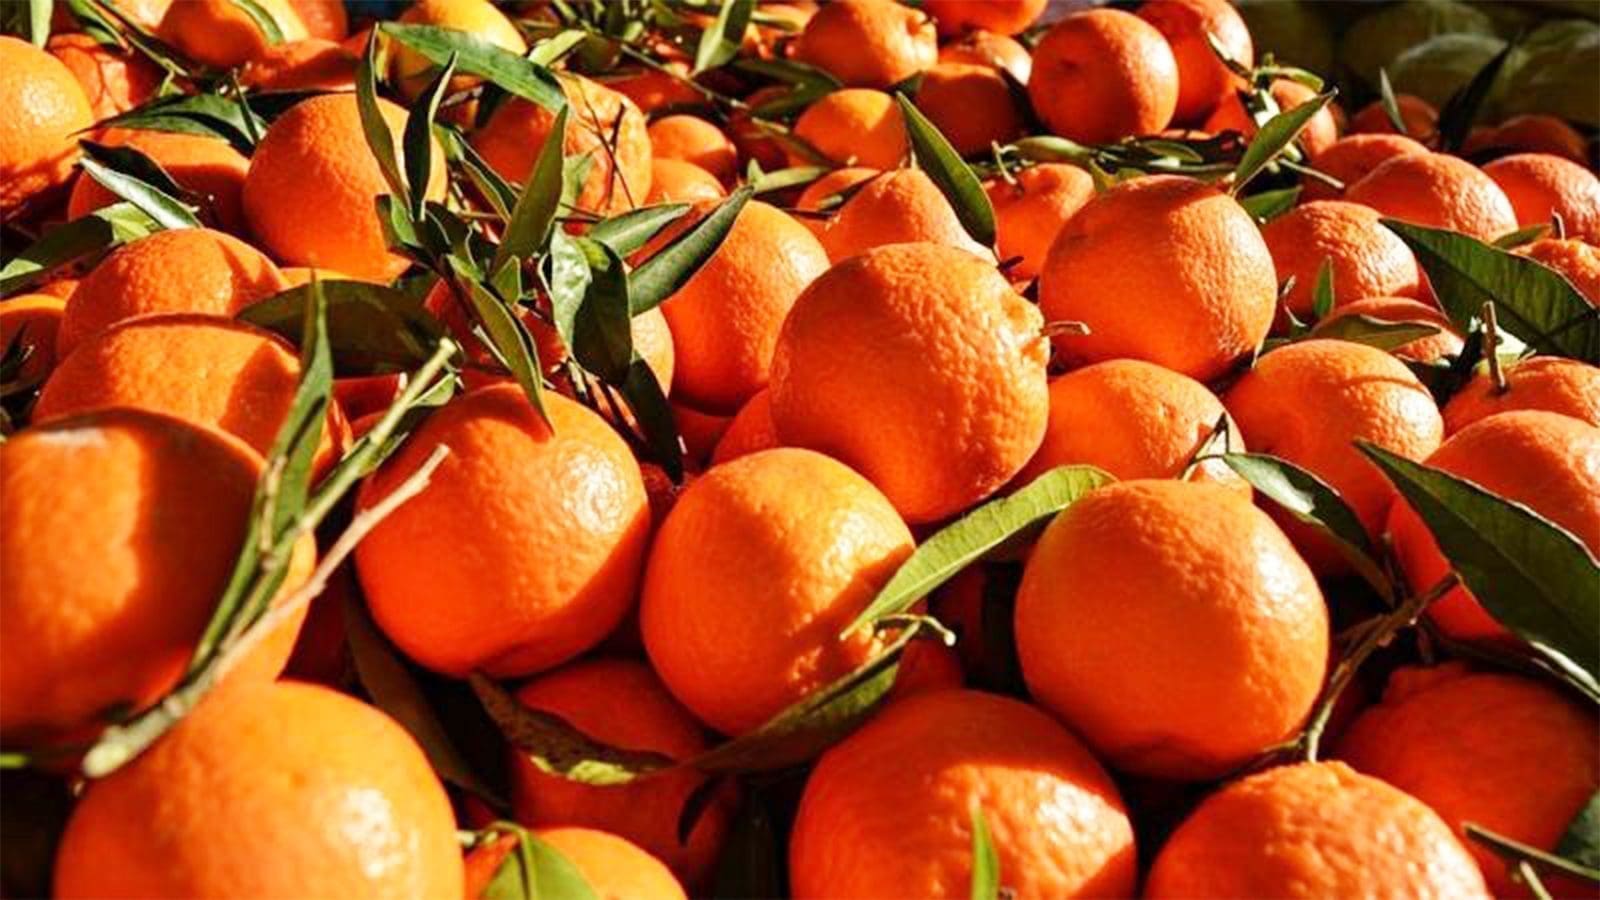 Russian authorities seize Egyptian oranges at port claiming they don’t meet specifications